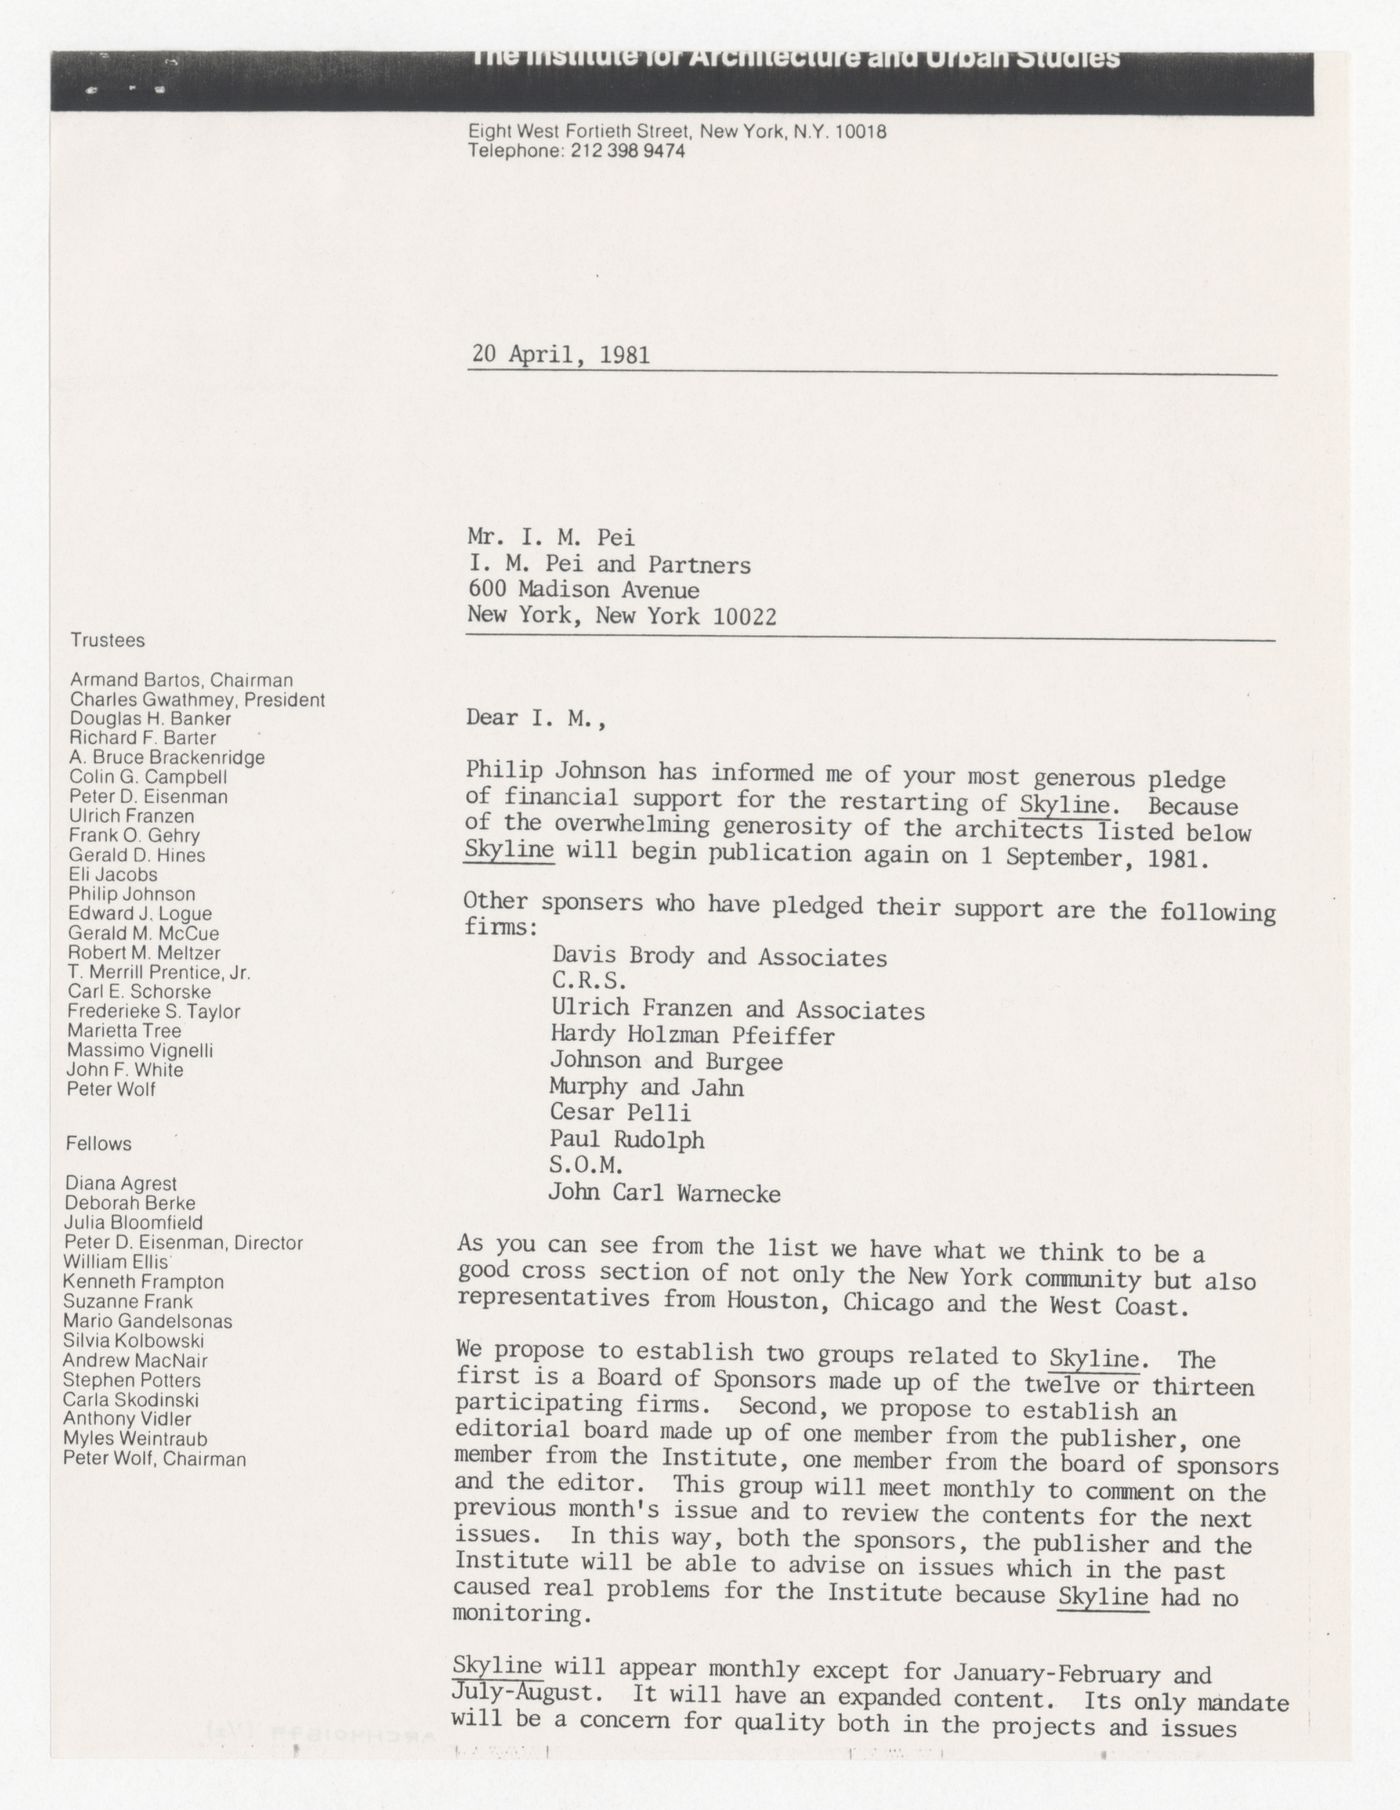 Letter from Peter D. Eisenman to Ieoh Ming Pei about sponsorship for Skyline